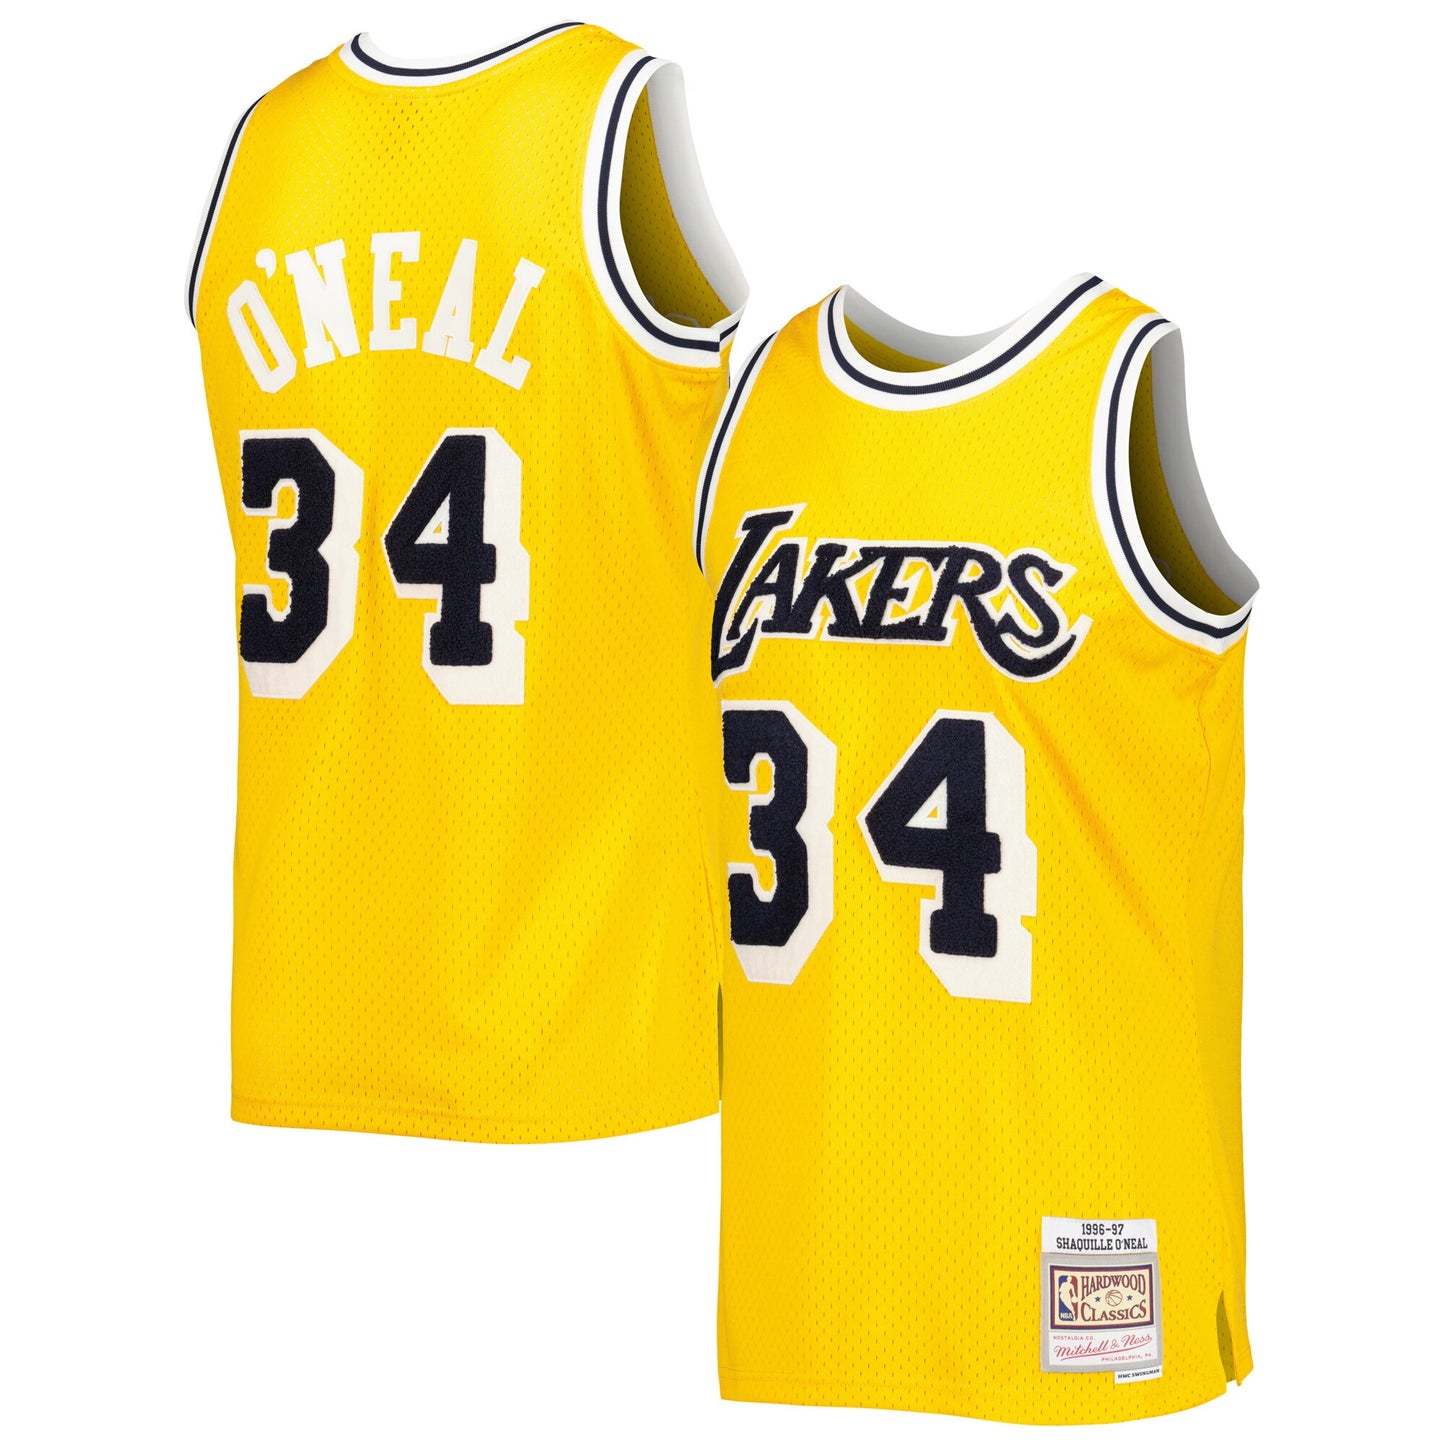 Shaquille O'Neal Los Angeles Lakers Mitchell & Ness Hardwood Classics Off-Court Swingman Jersey - Yellow